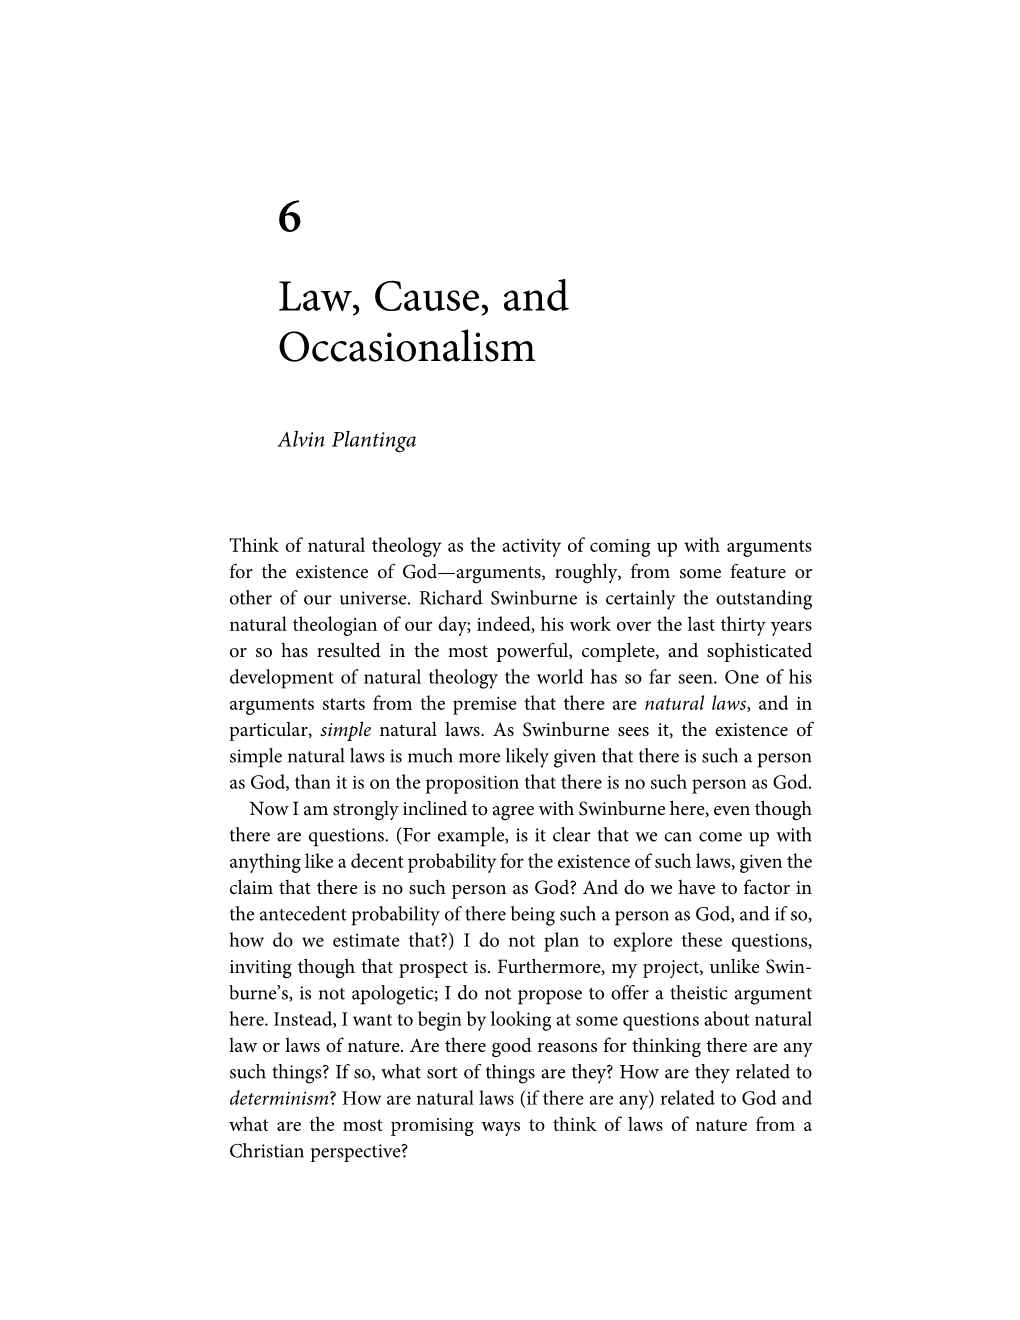 Law, Cause, and Occasionalism